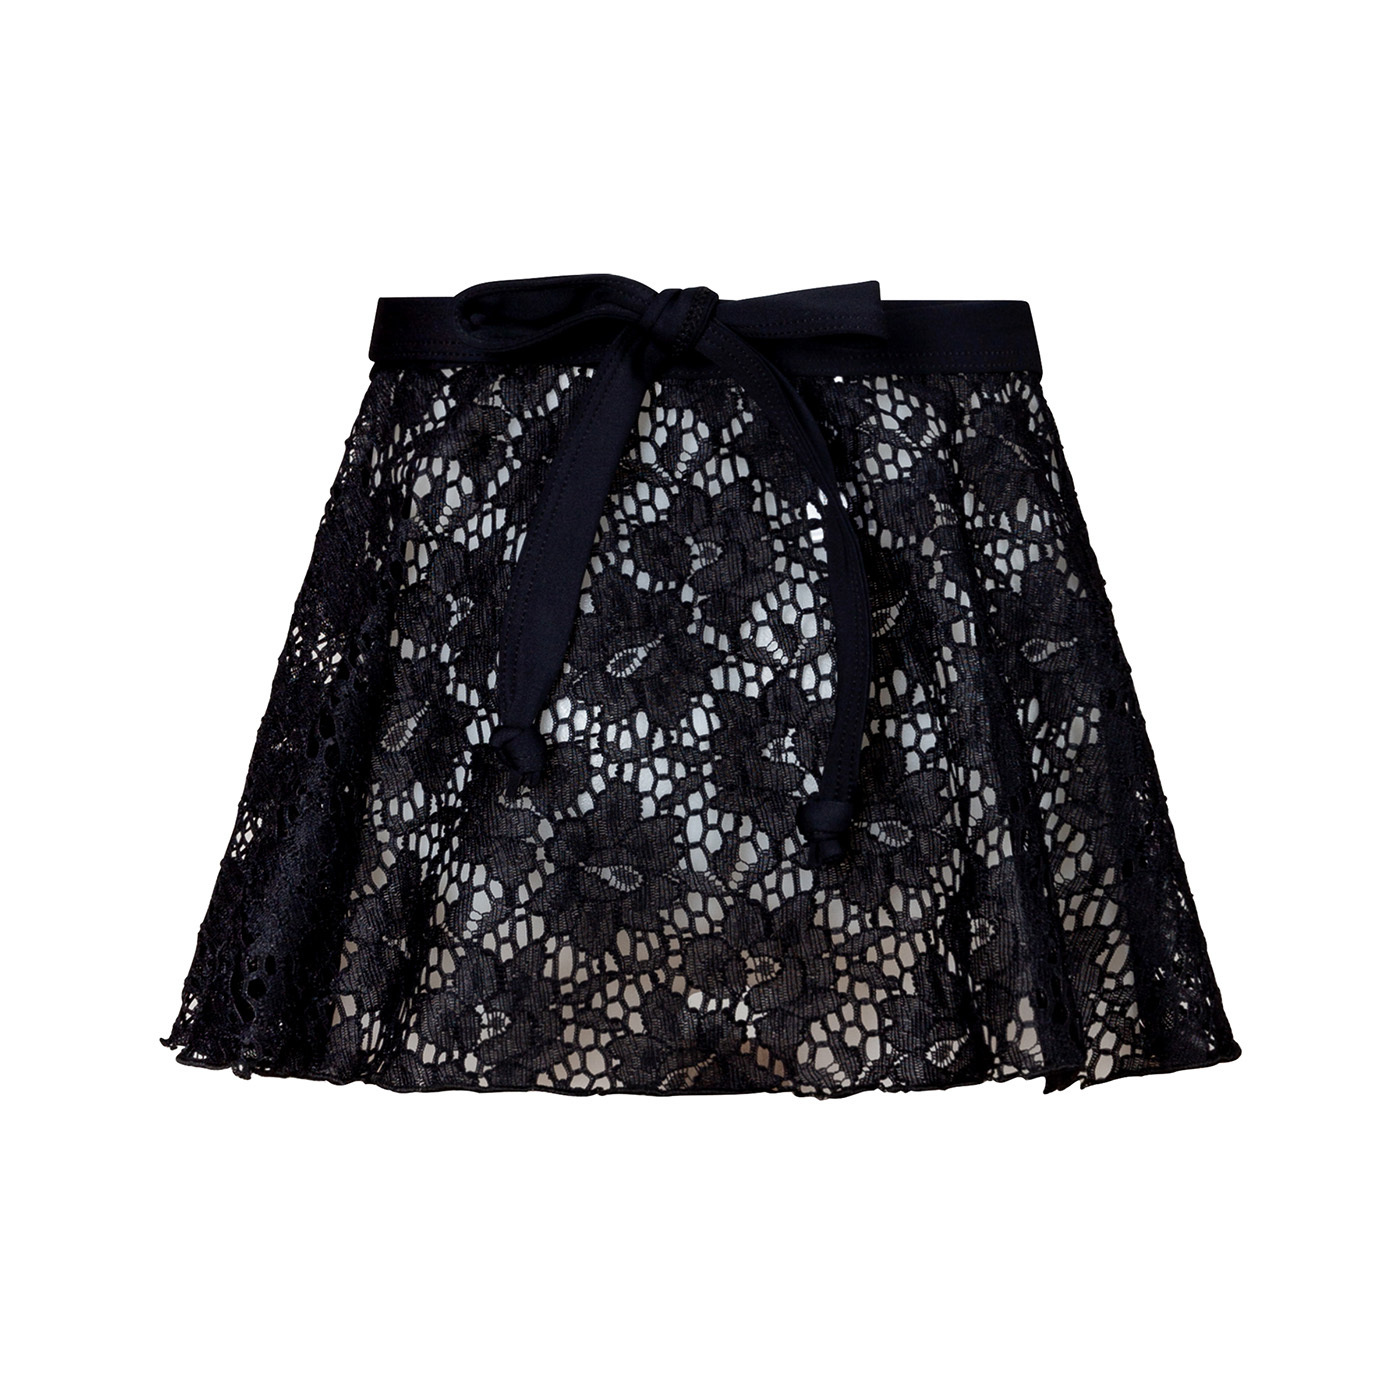 Energetiks Melody Lace Skirt Adult